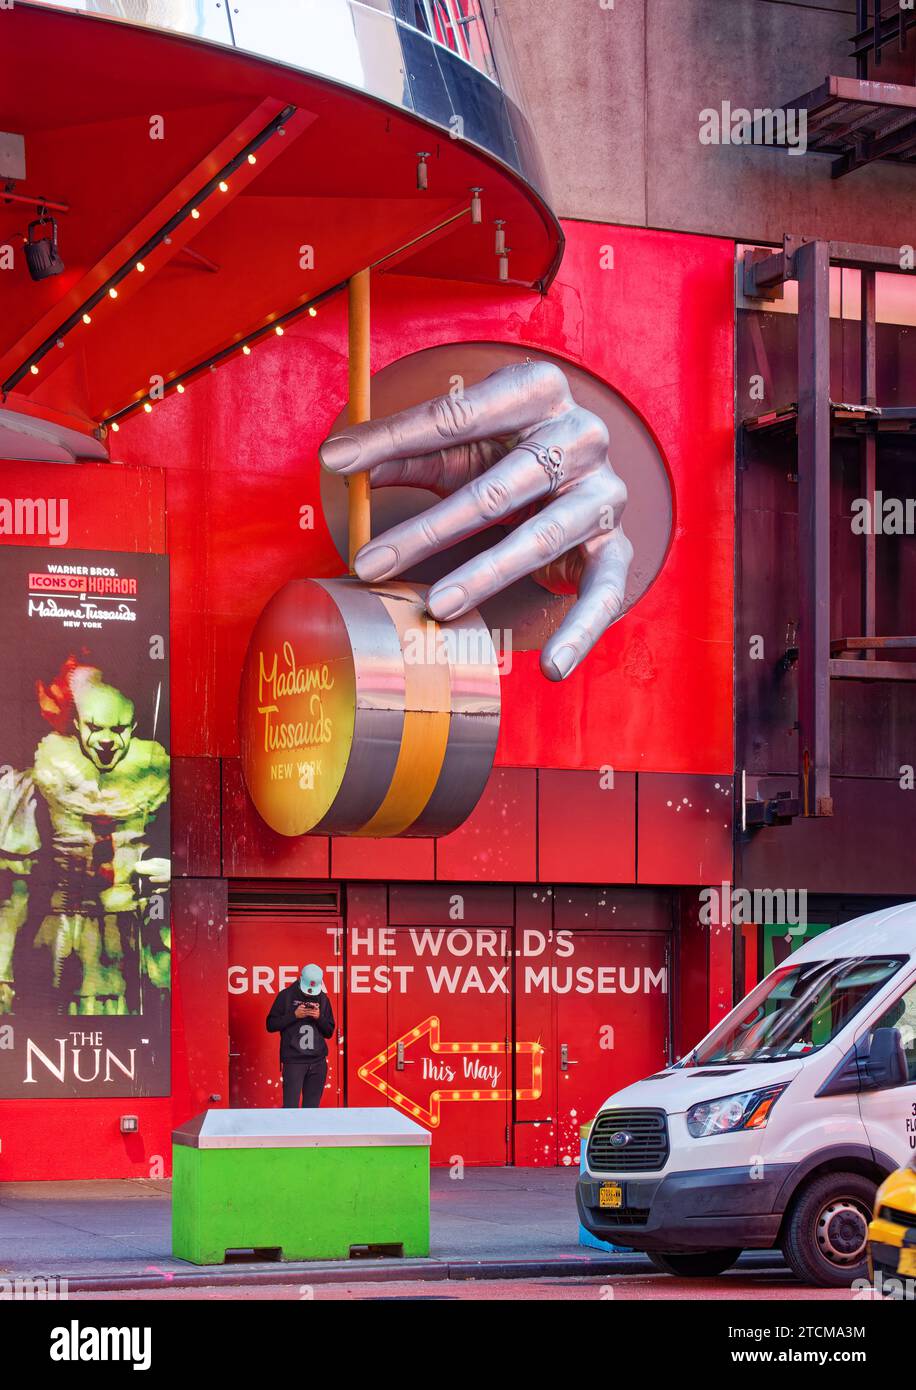 Need a hand? Madame Tussaud’s wax museum has you covered on West 46th Street in the heart of the Times Square Entertainment District. Stock Photo